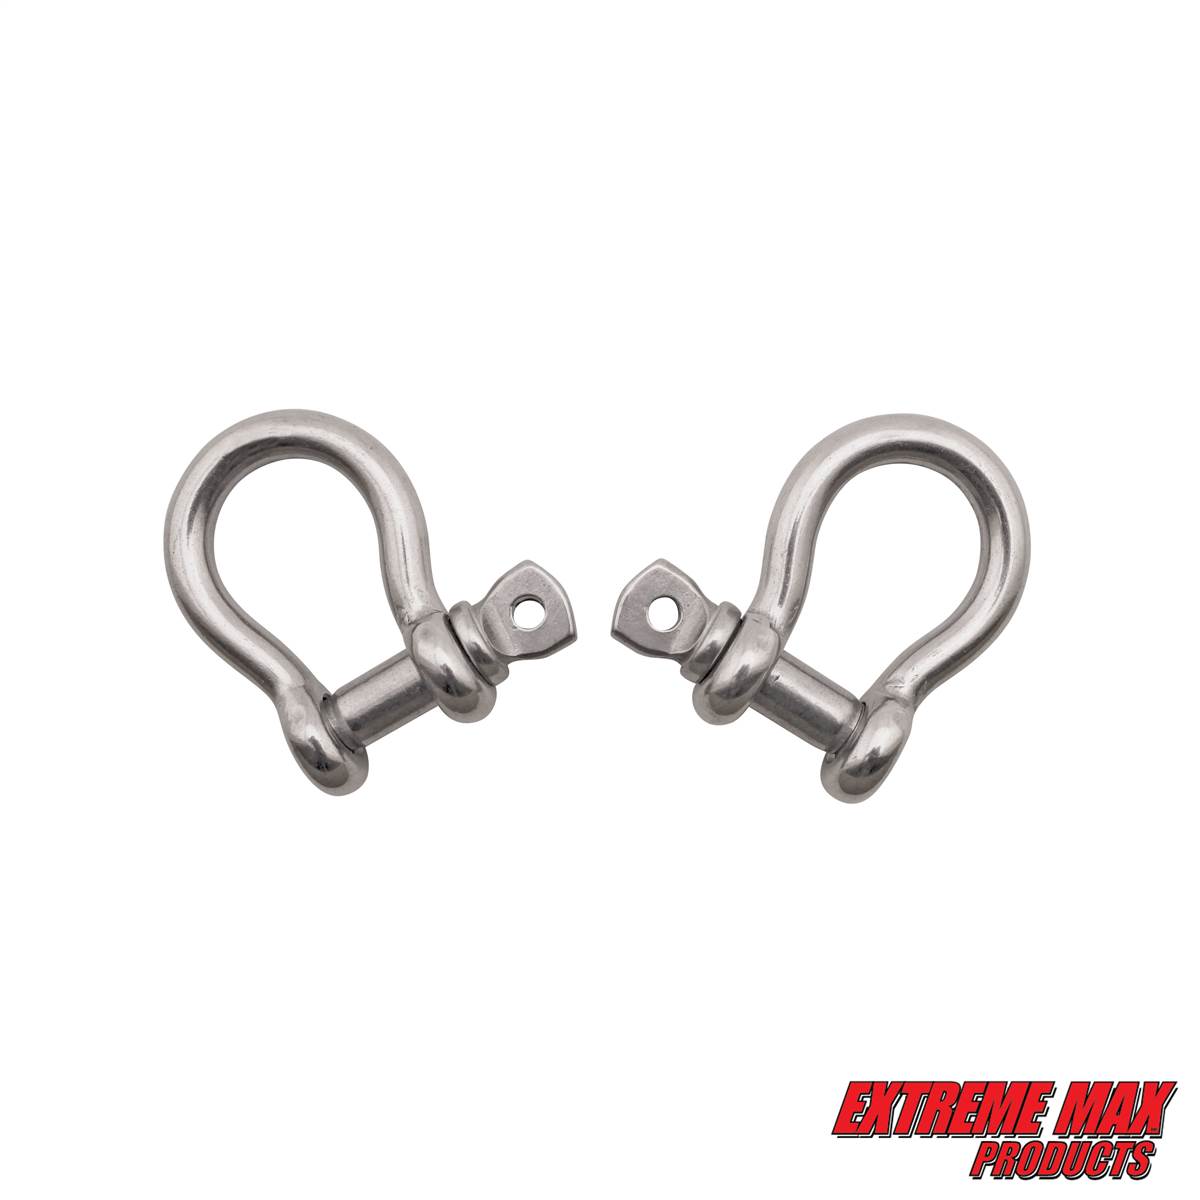 1/4 Extreme Max 3006.8366.2 BoatTector Stainless Steel Bolt-Type Anchor Shackle 2-Pack 